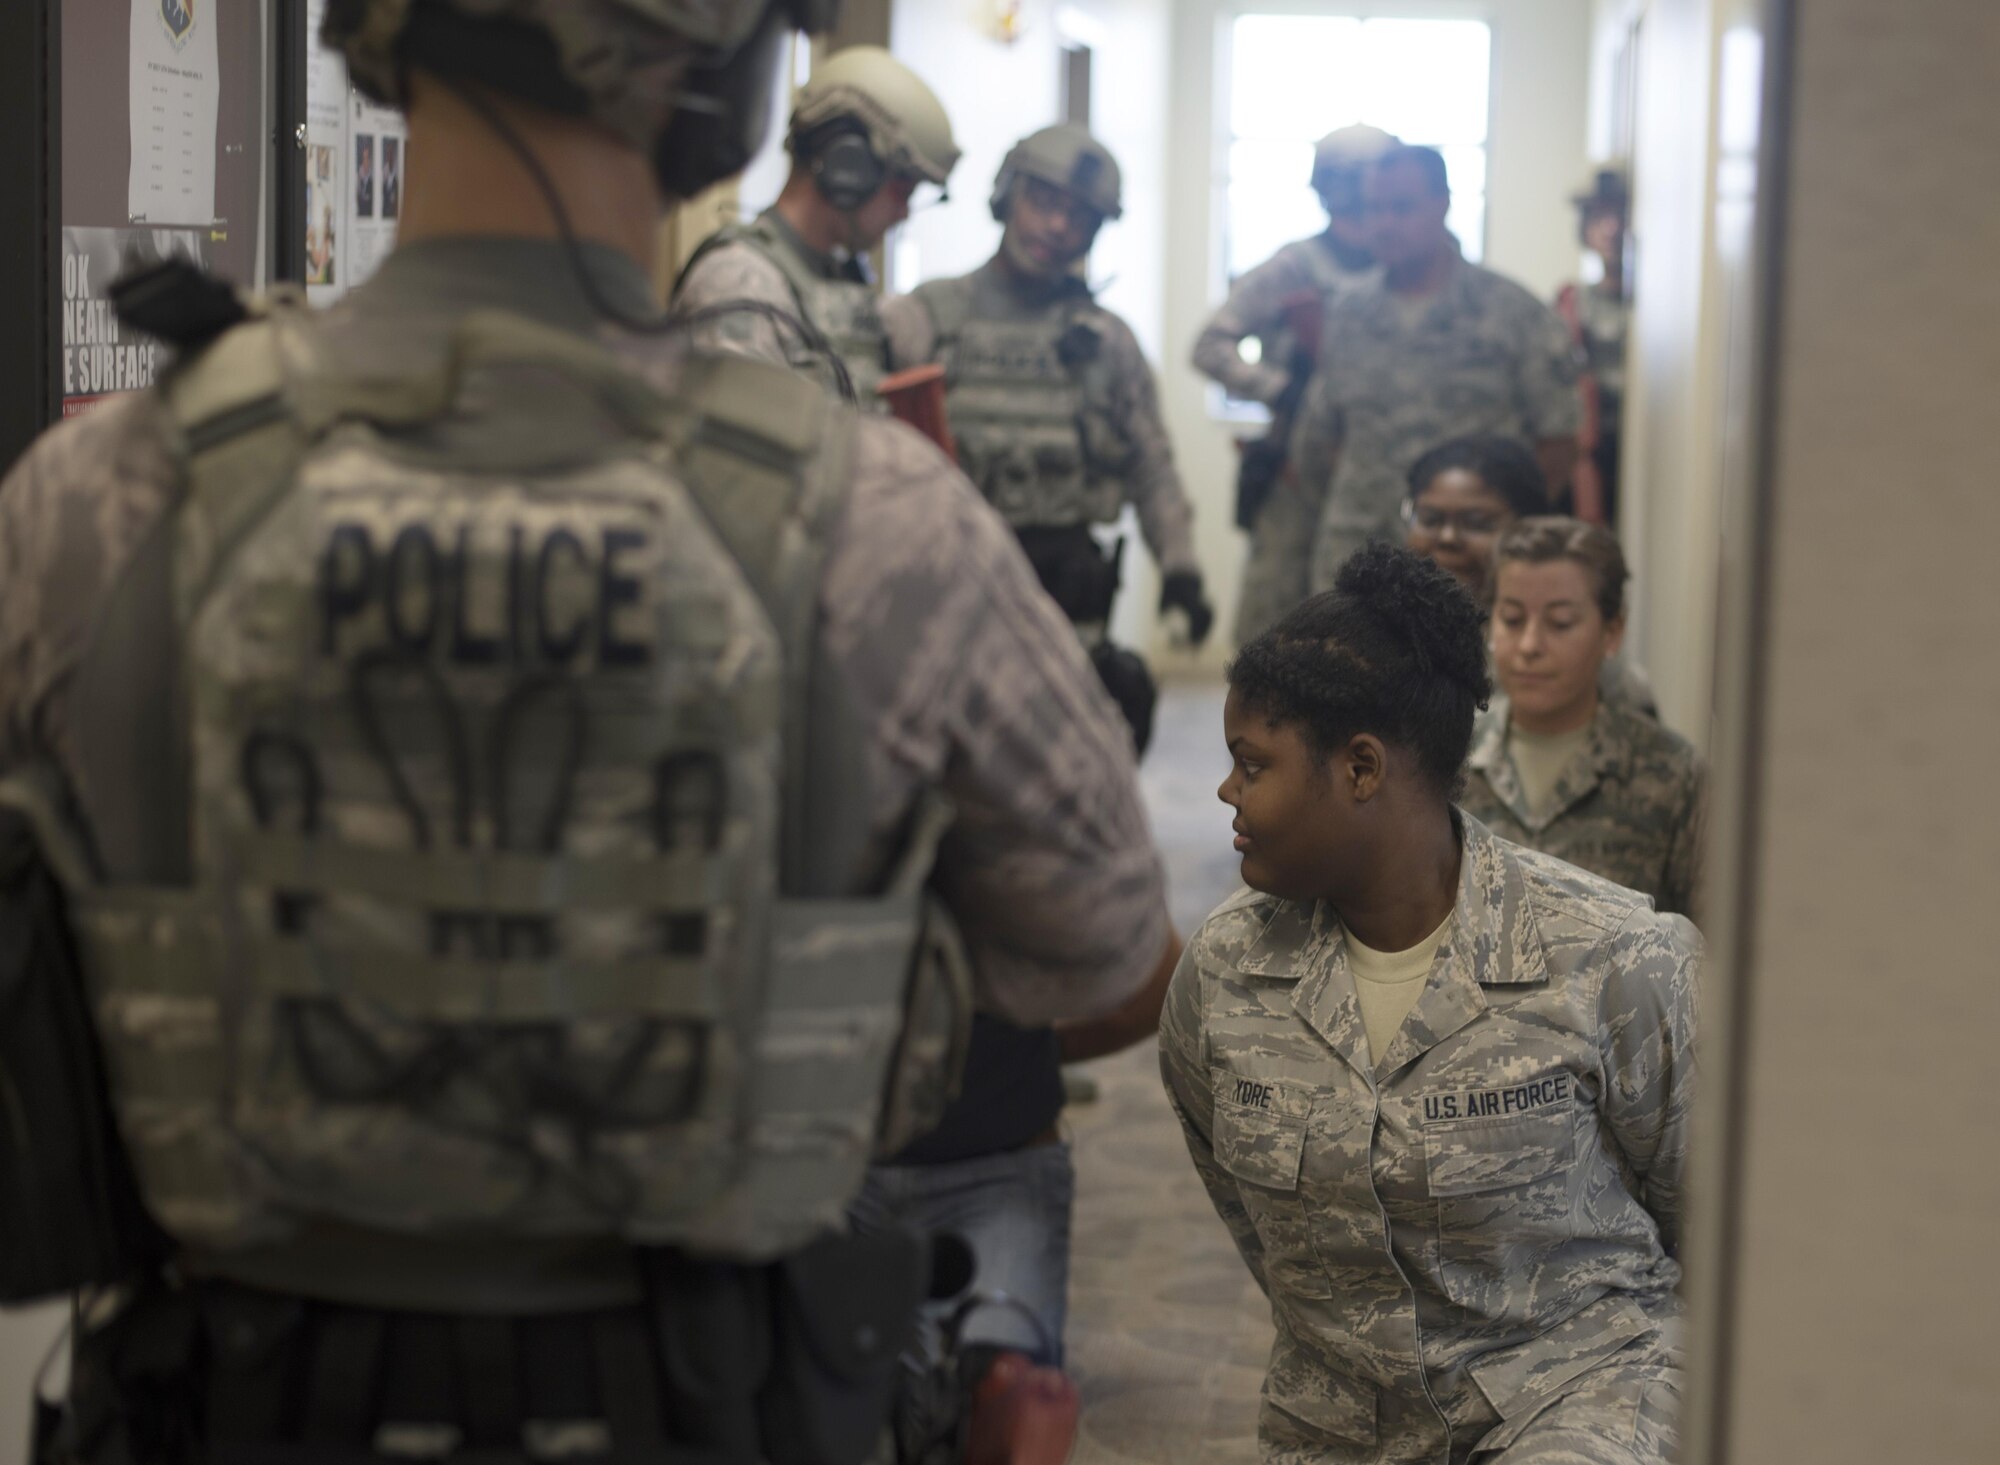 Members of the 927th Air Refueling Wing are detained by Airmen assigned to the 6th Security Forces Squadron (SFS) during an active shooter exercise, April 17, 2017 at MacDill Air Force Base, Fla. After the shooter was controlled, members of the 6th SFS cleared rooms to evacuate all personnel. (U.S. Air Force photo by Airman 1st Class Adam R. Shanks)